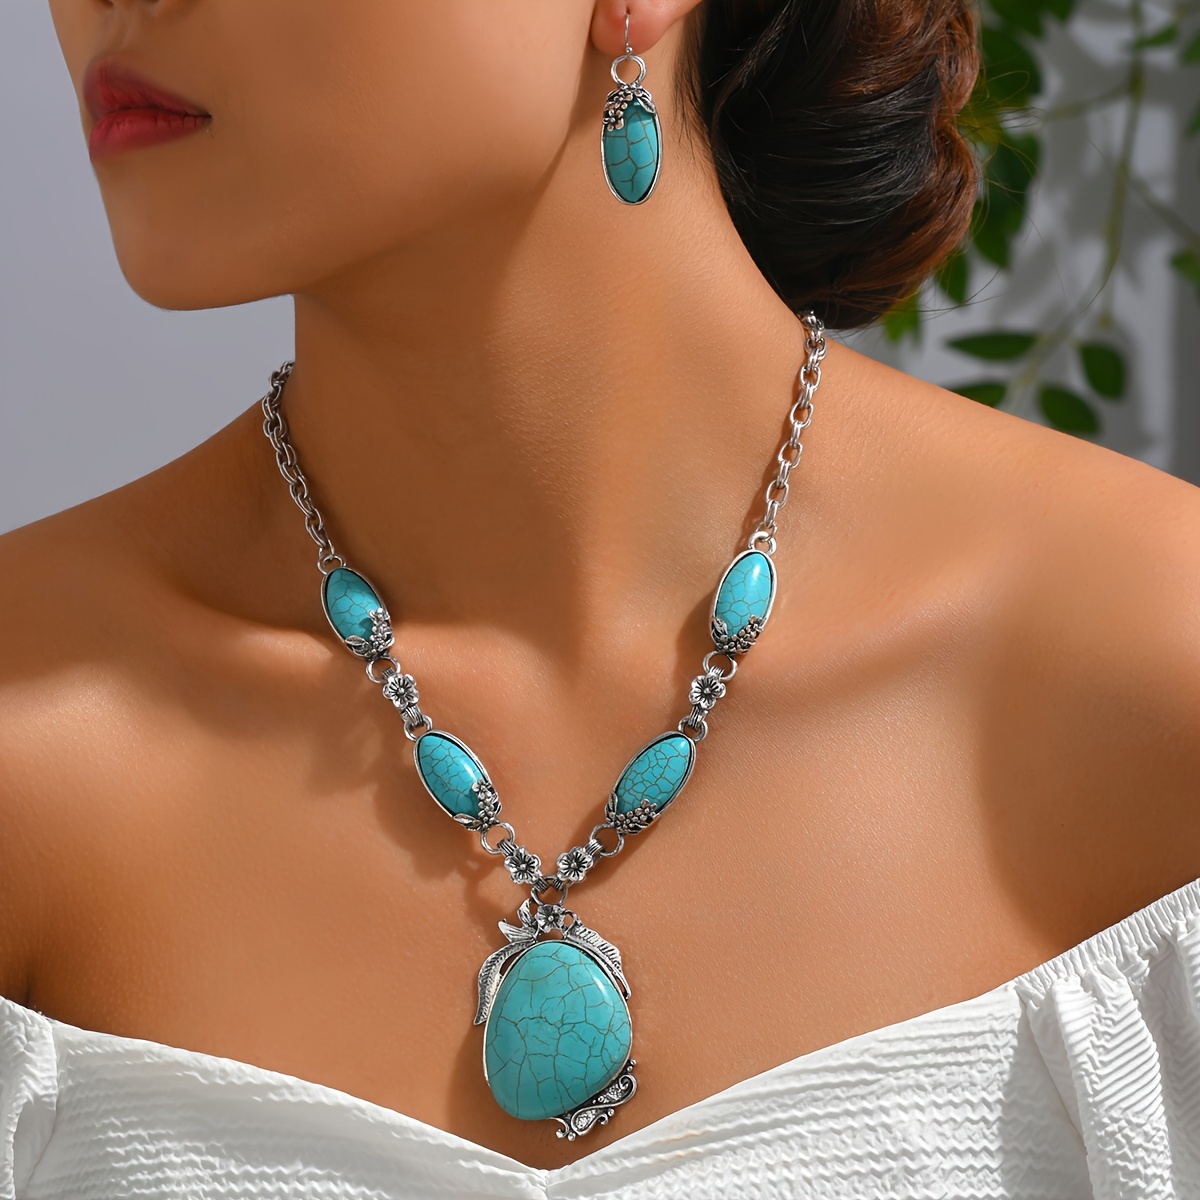 

Bohemian Style 3pcs Ancient Silver Alloy Jewelry Set With Carved Flower And Inlaid Turquoise Stones, Luxurious Vintage Necklace & Earrings Set For Women, Ideal For Beach Holiday Accessory Gift